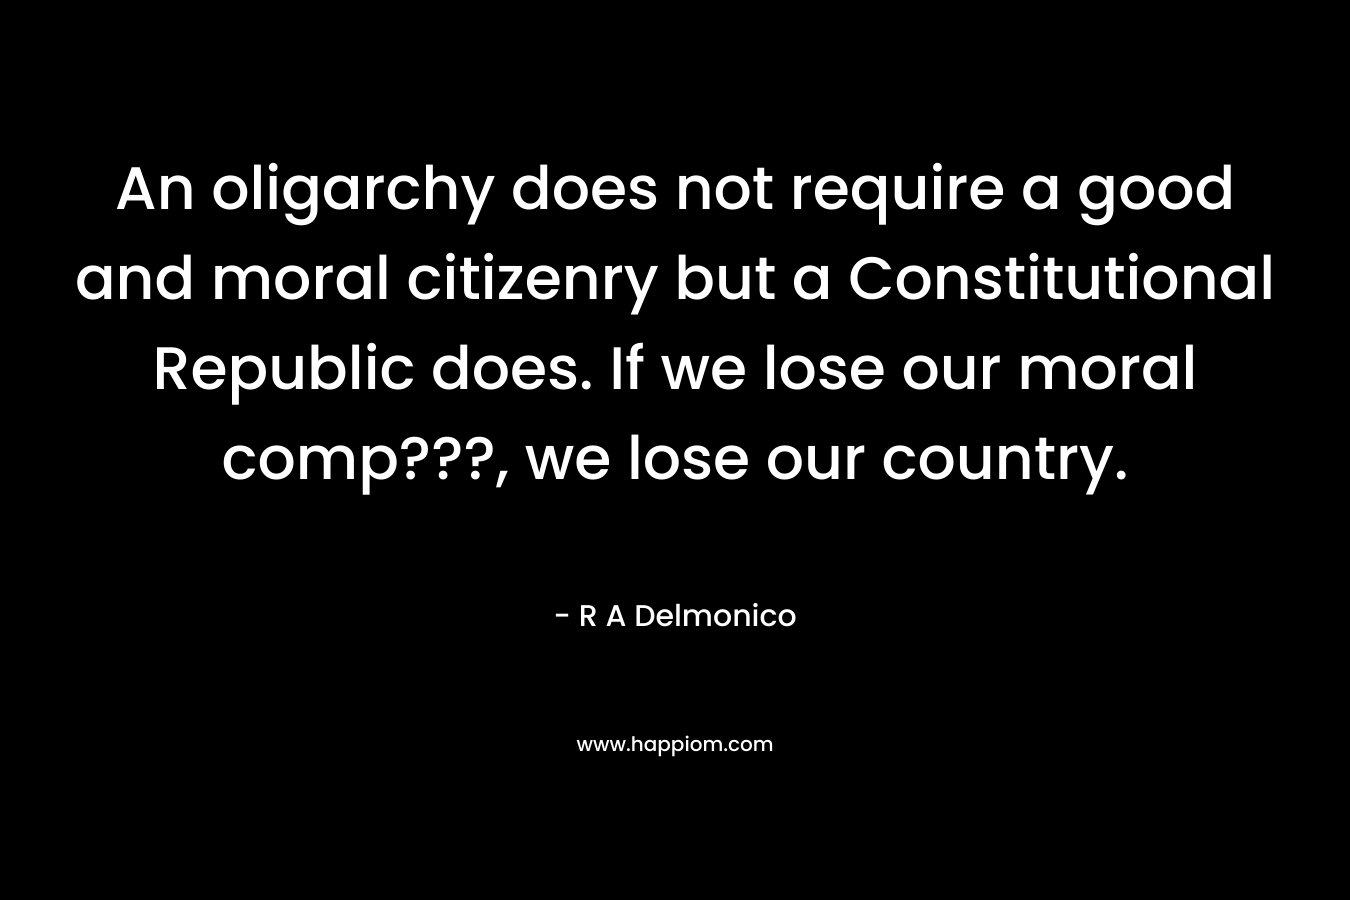 An oligarchy does not require a good and moral citizenry but a Constitutional Republic does. If we lose our moral comp???, we lose our country. – R A Delmonico